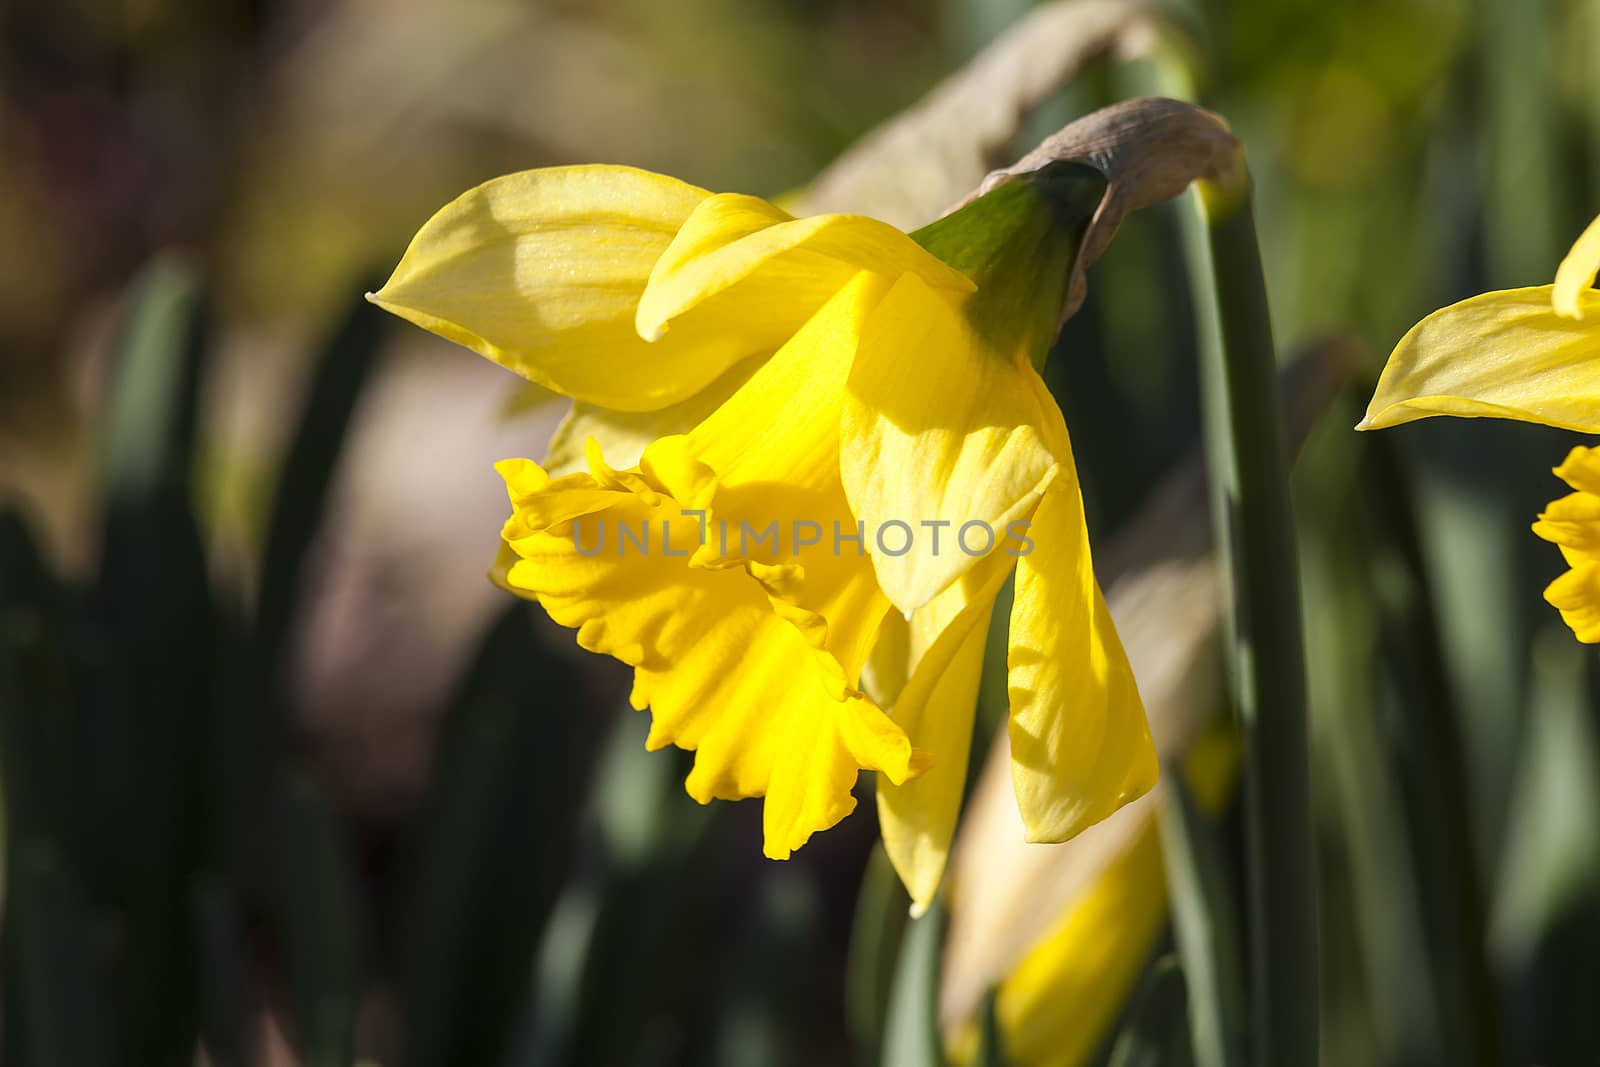 Daffodil (narcissus) 'Early Sensation' which flowers early in January and February